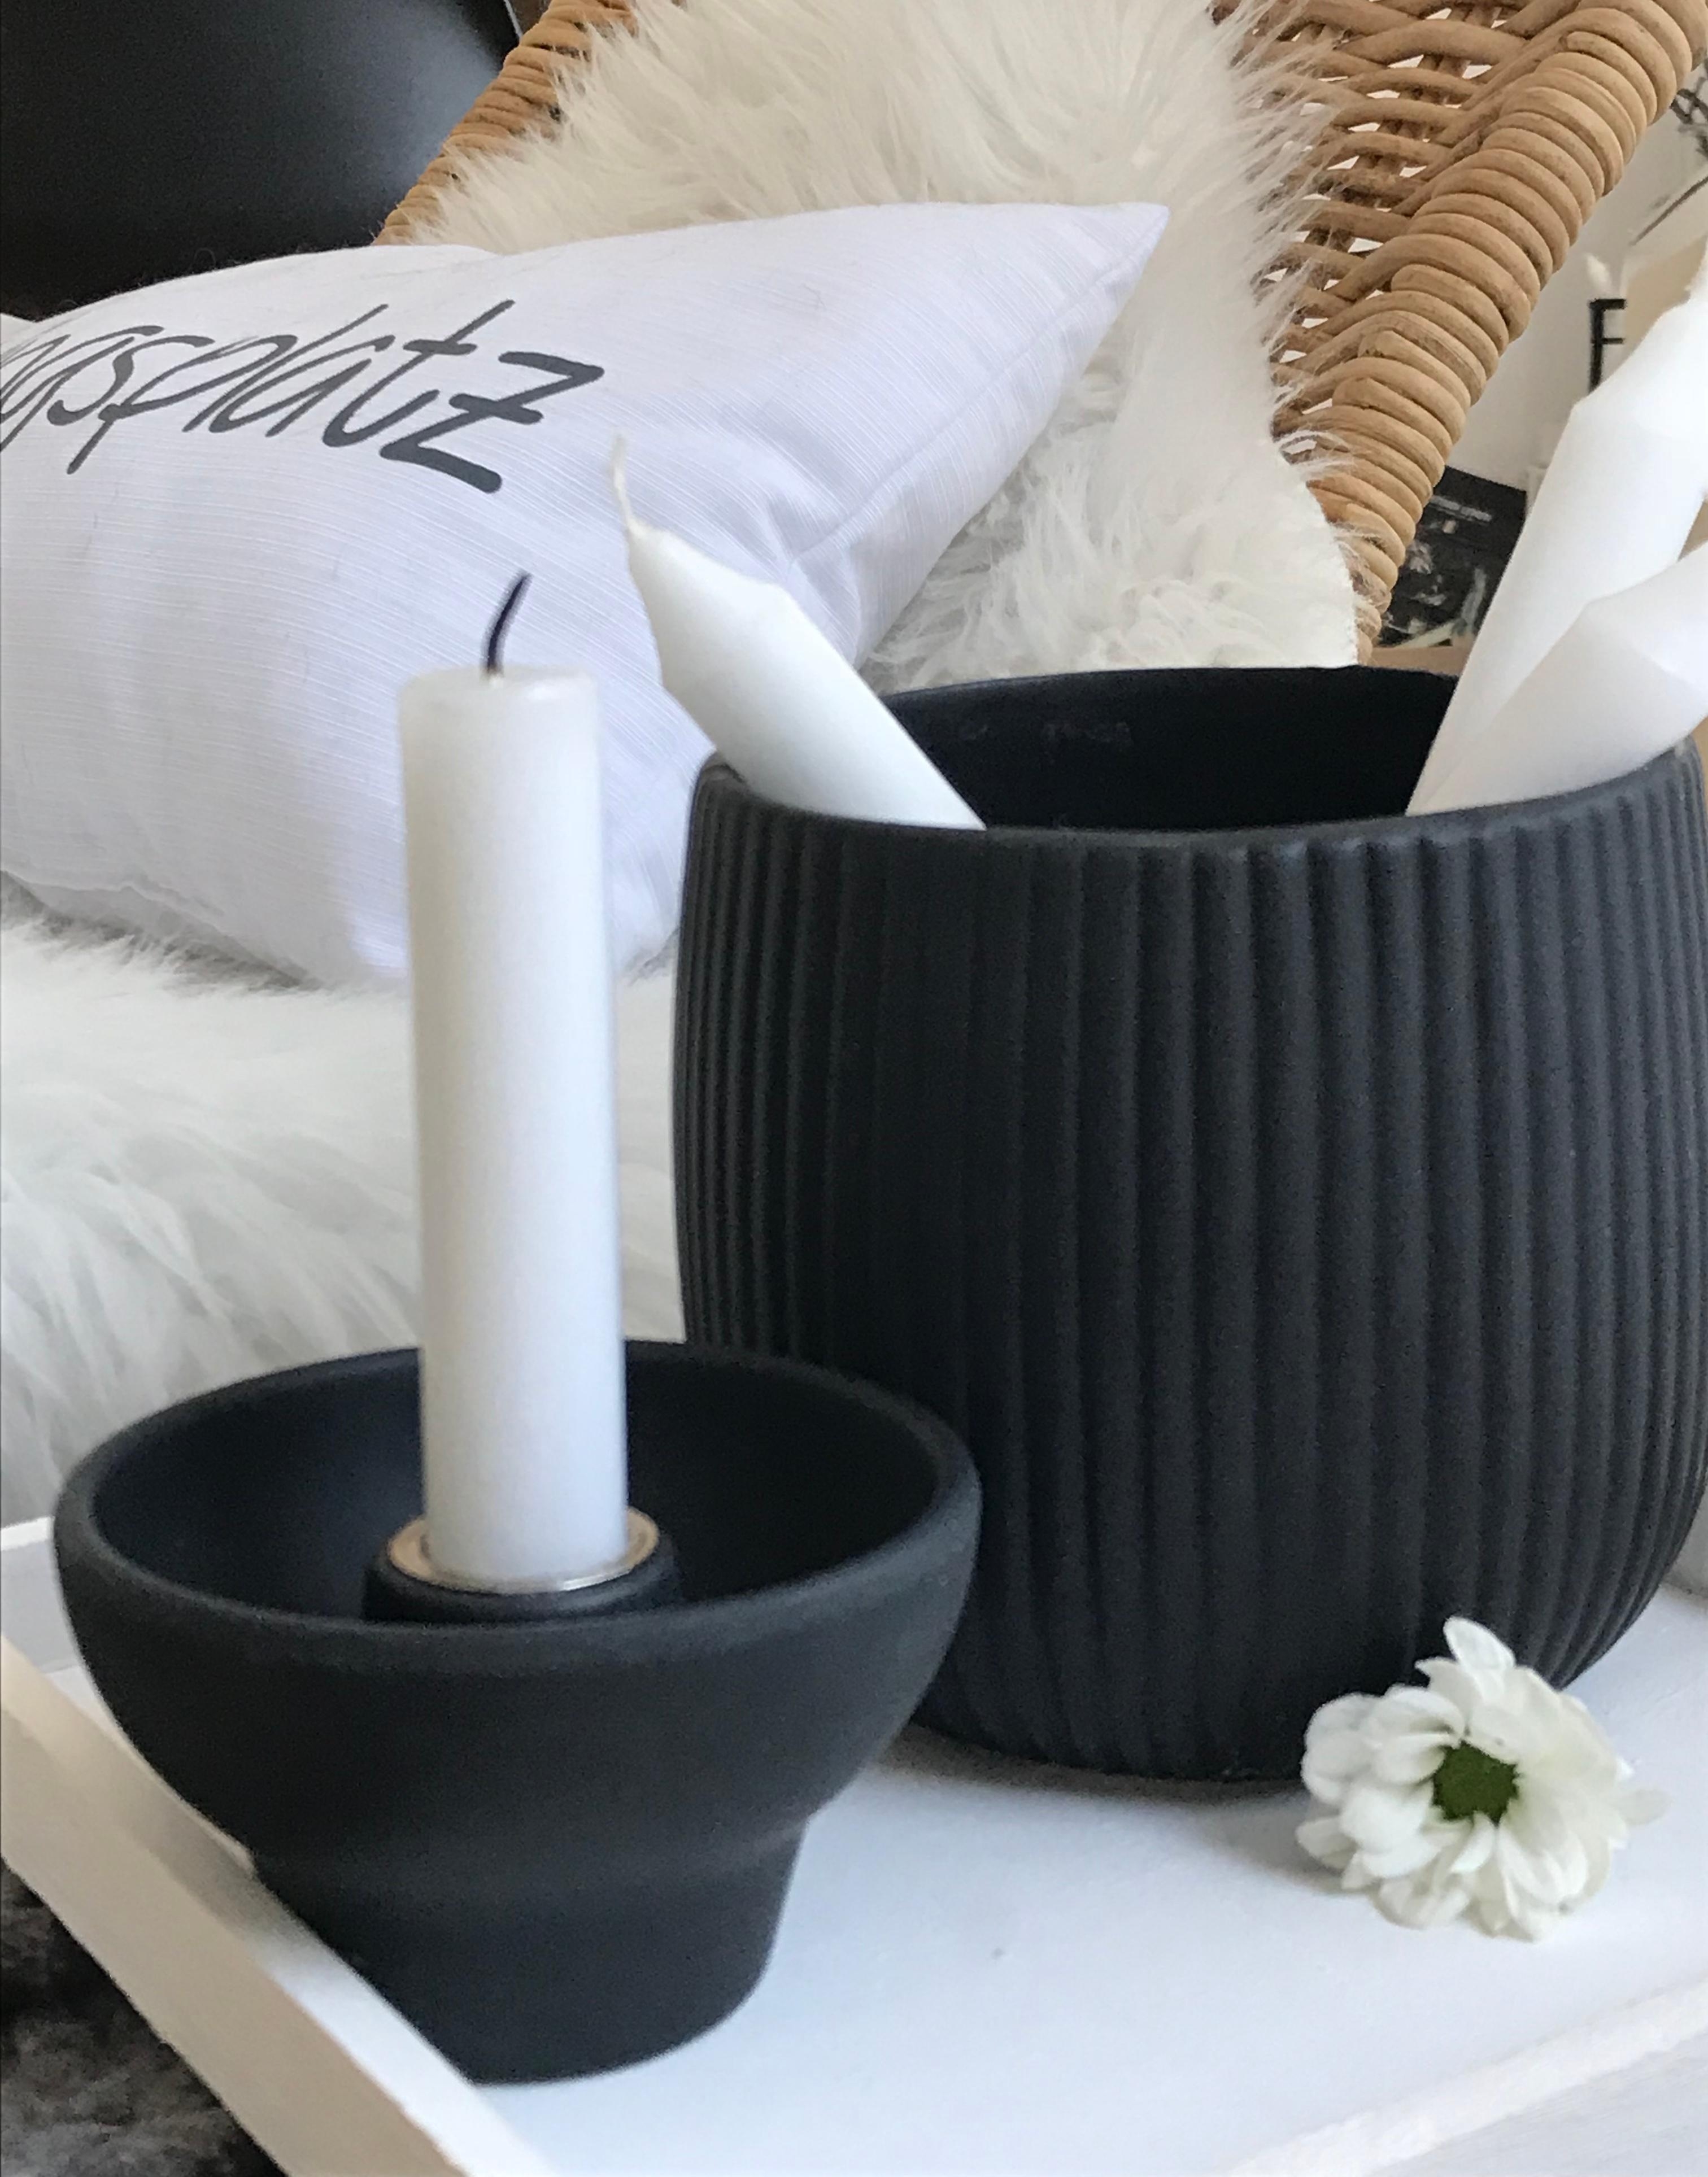 Saturday #black&white #candles #relaxed 